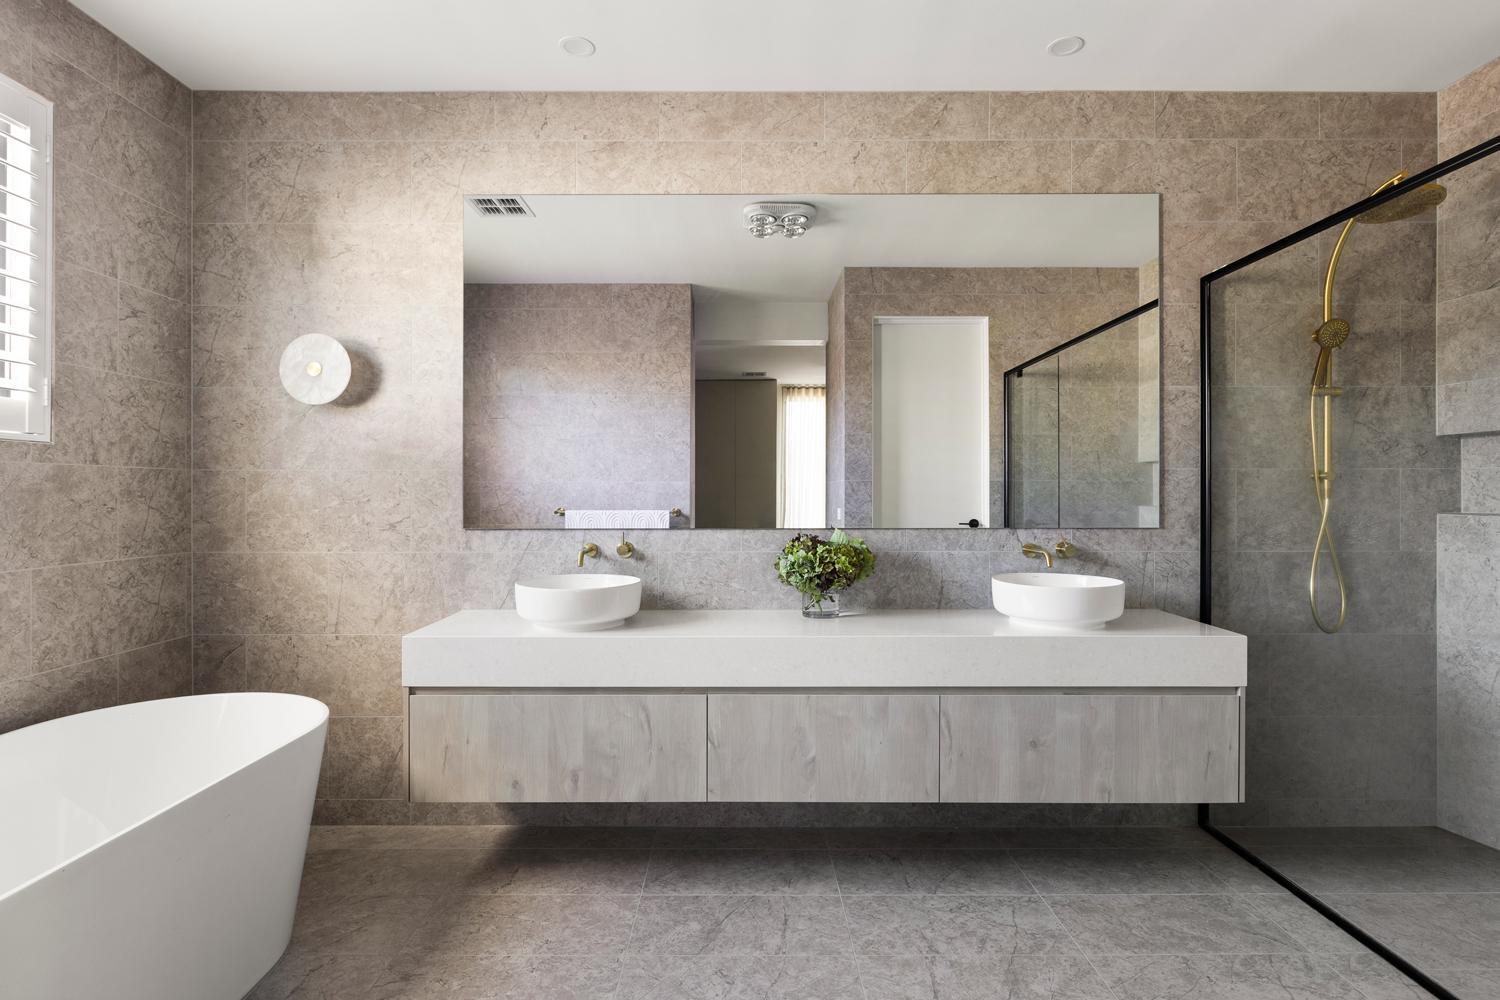 Luxurious ensuite with floor to ceiling stone tiles